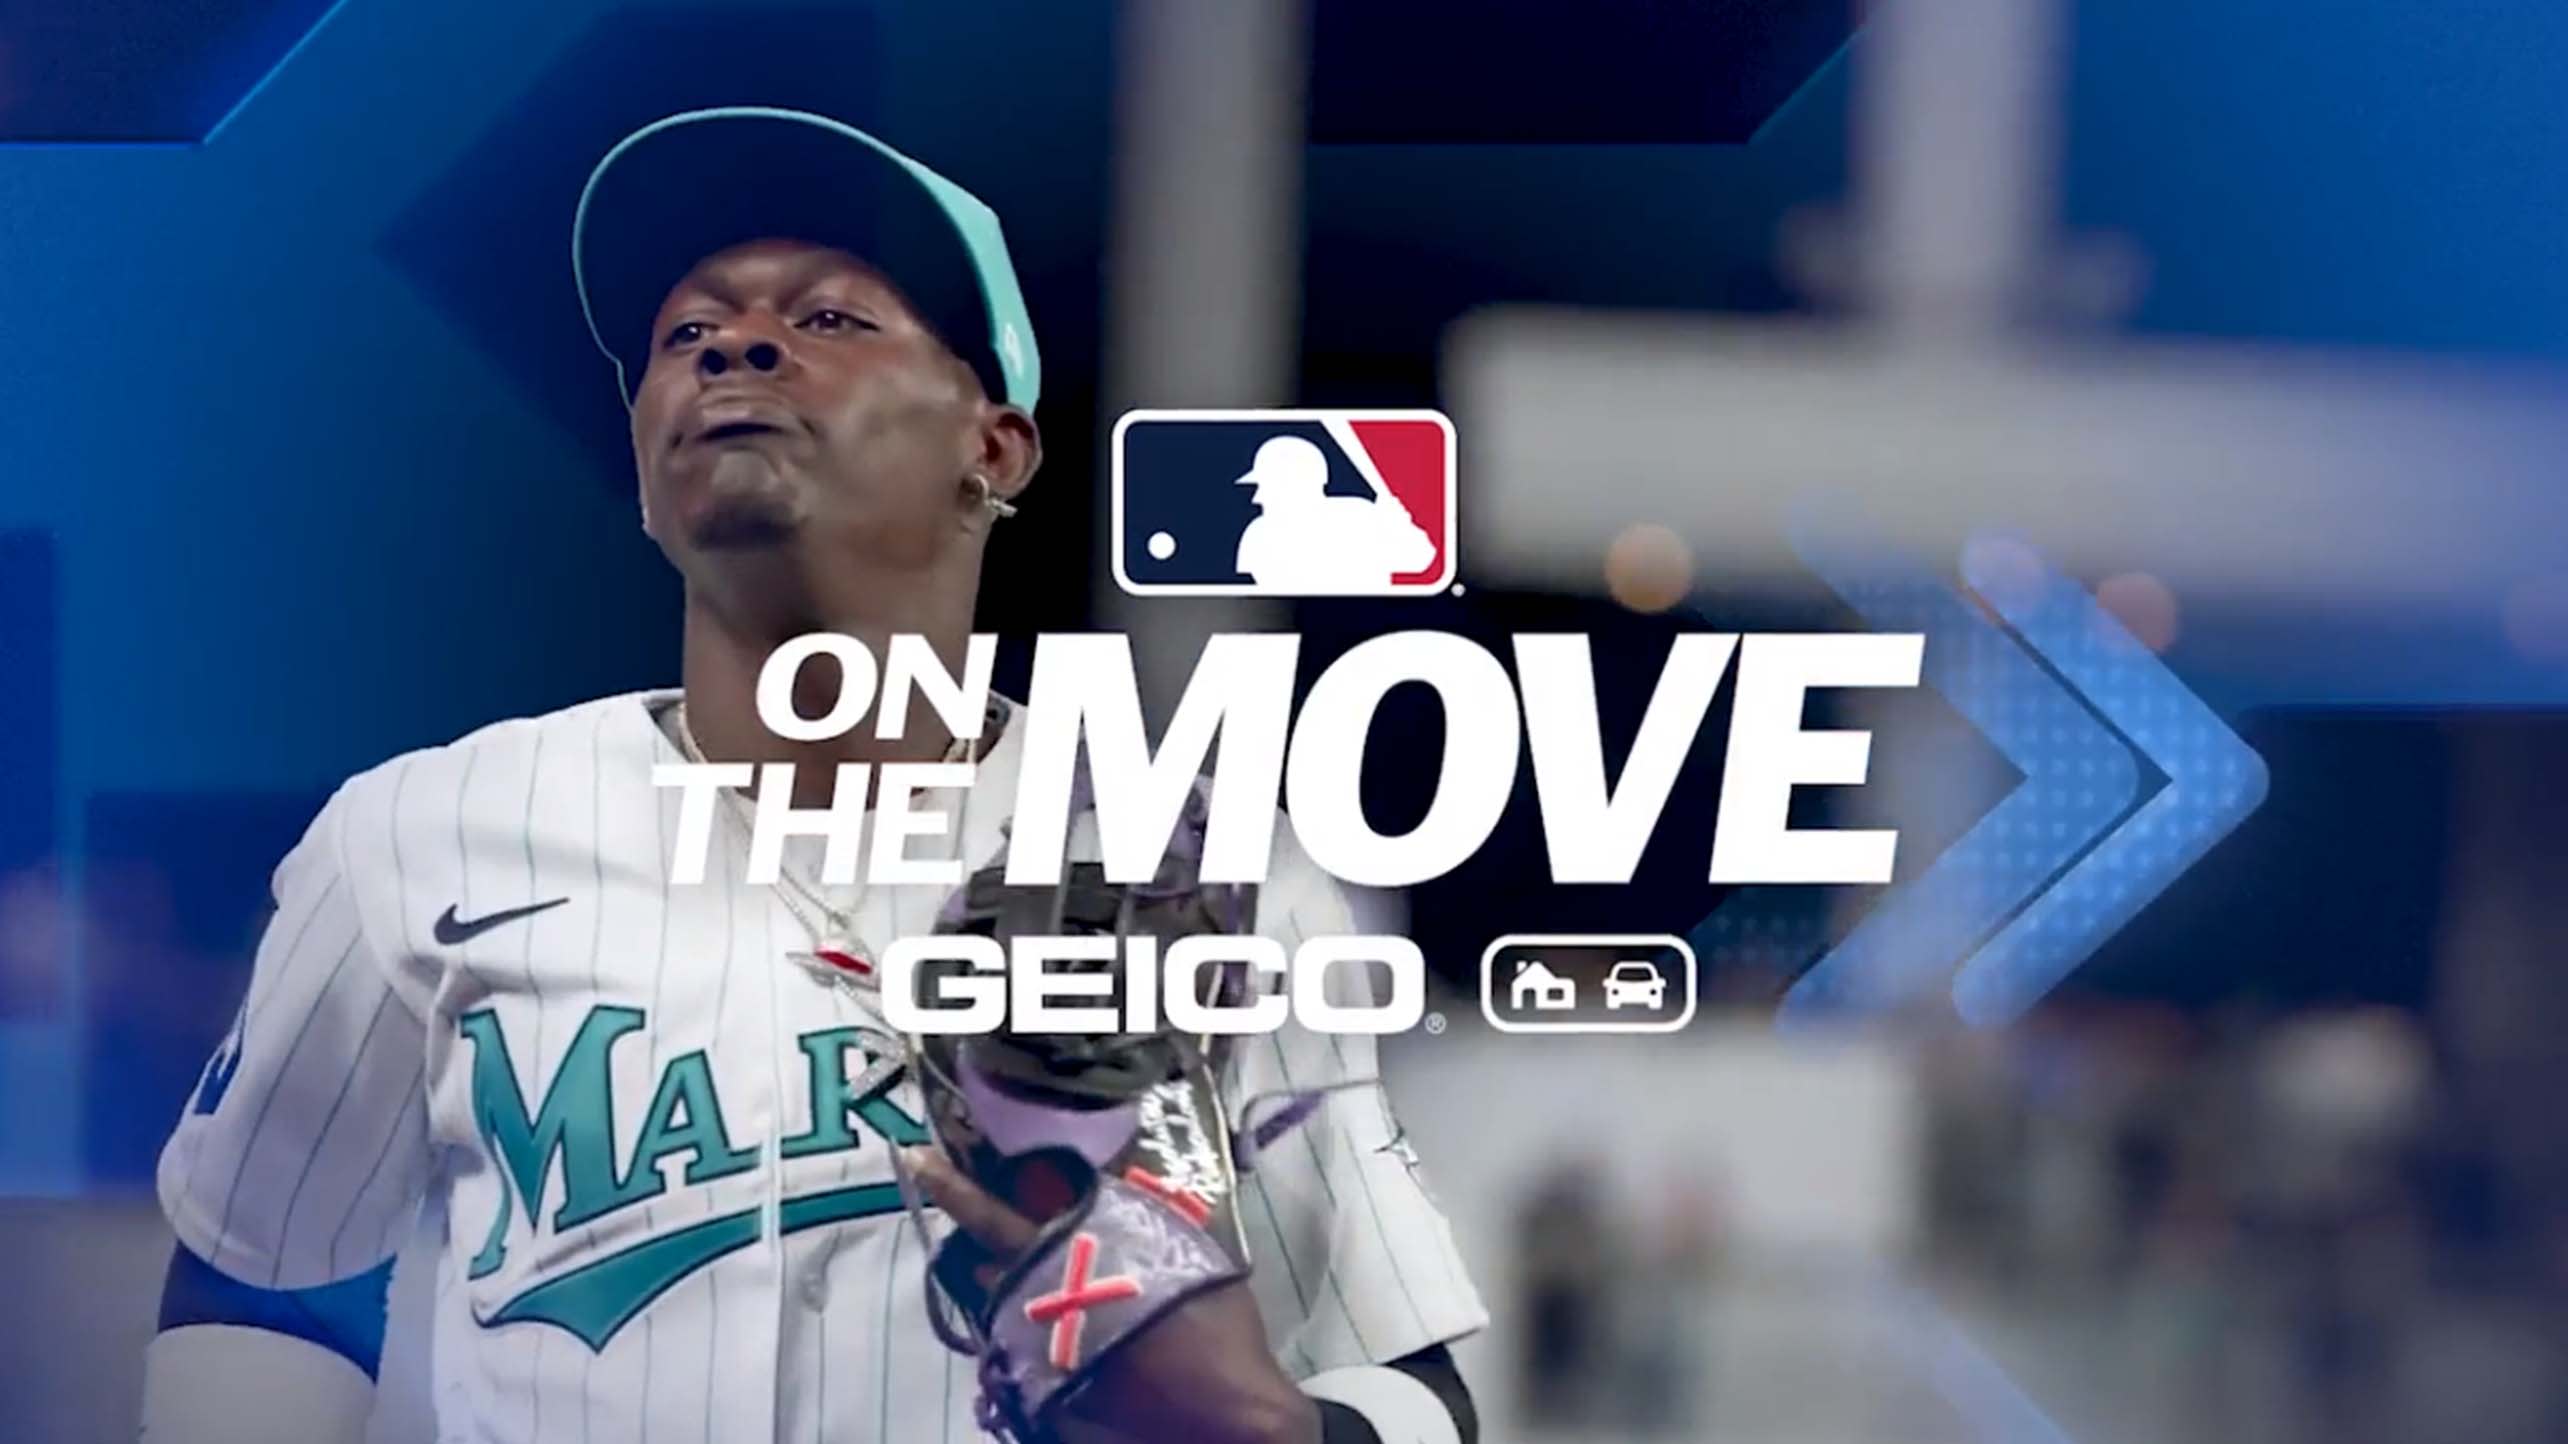 Jazz Chisholm is pictured with the words On The Move and the Geico logo